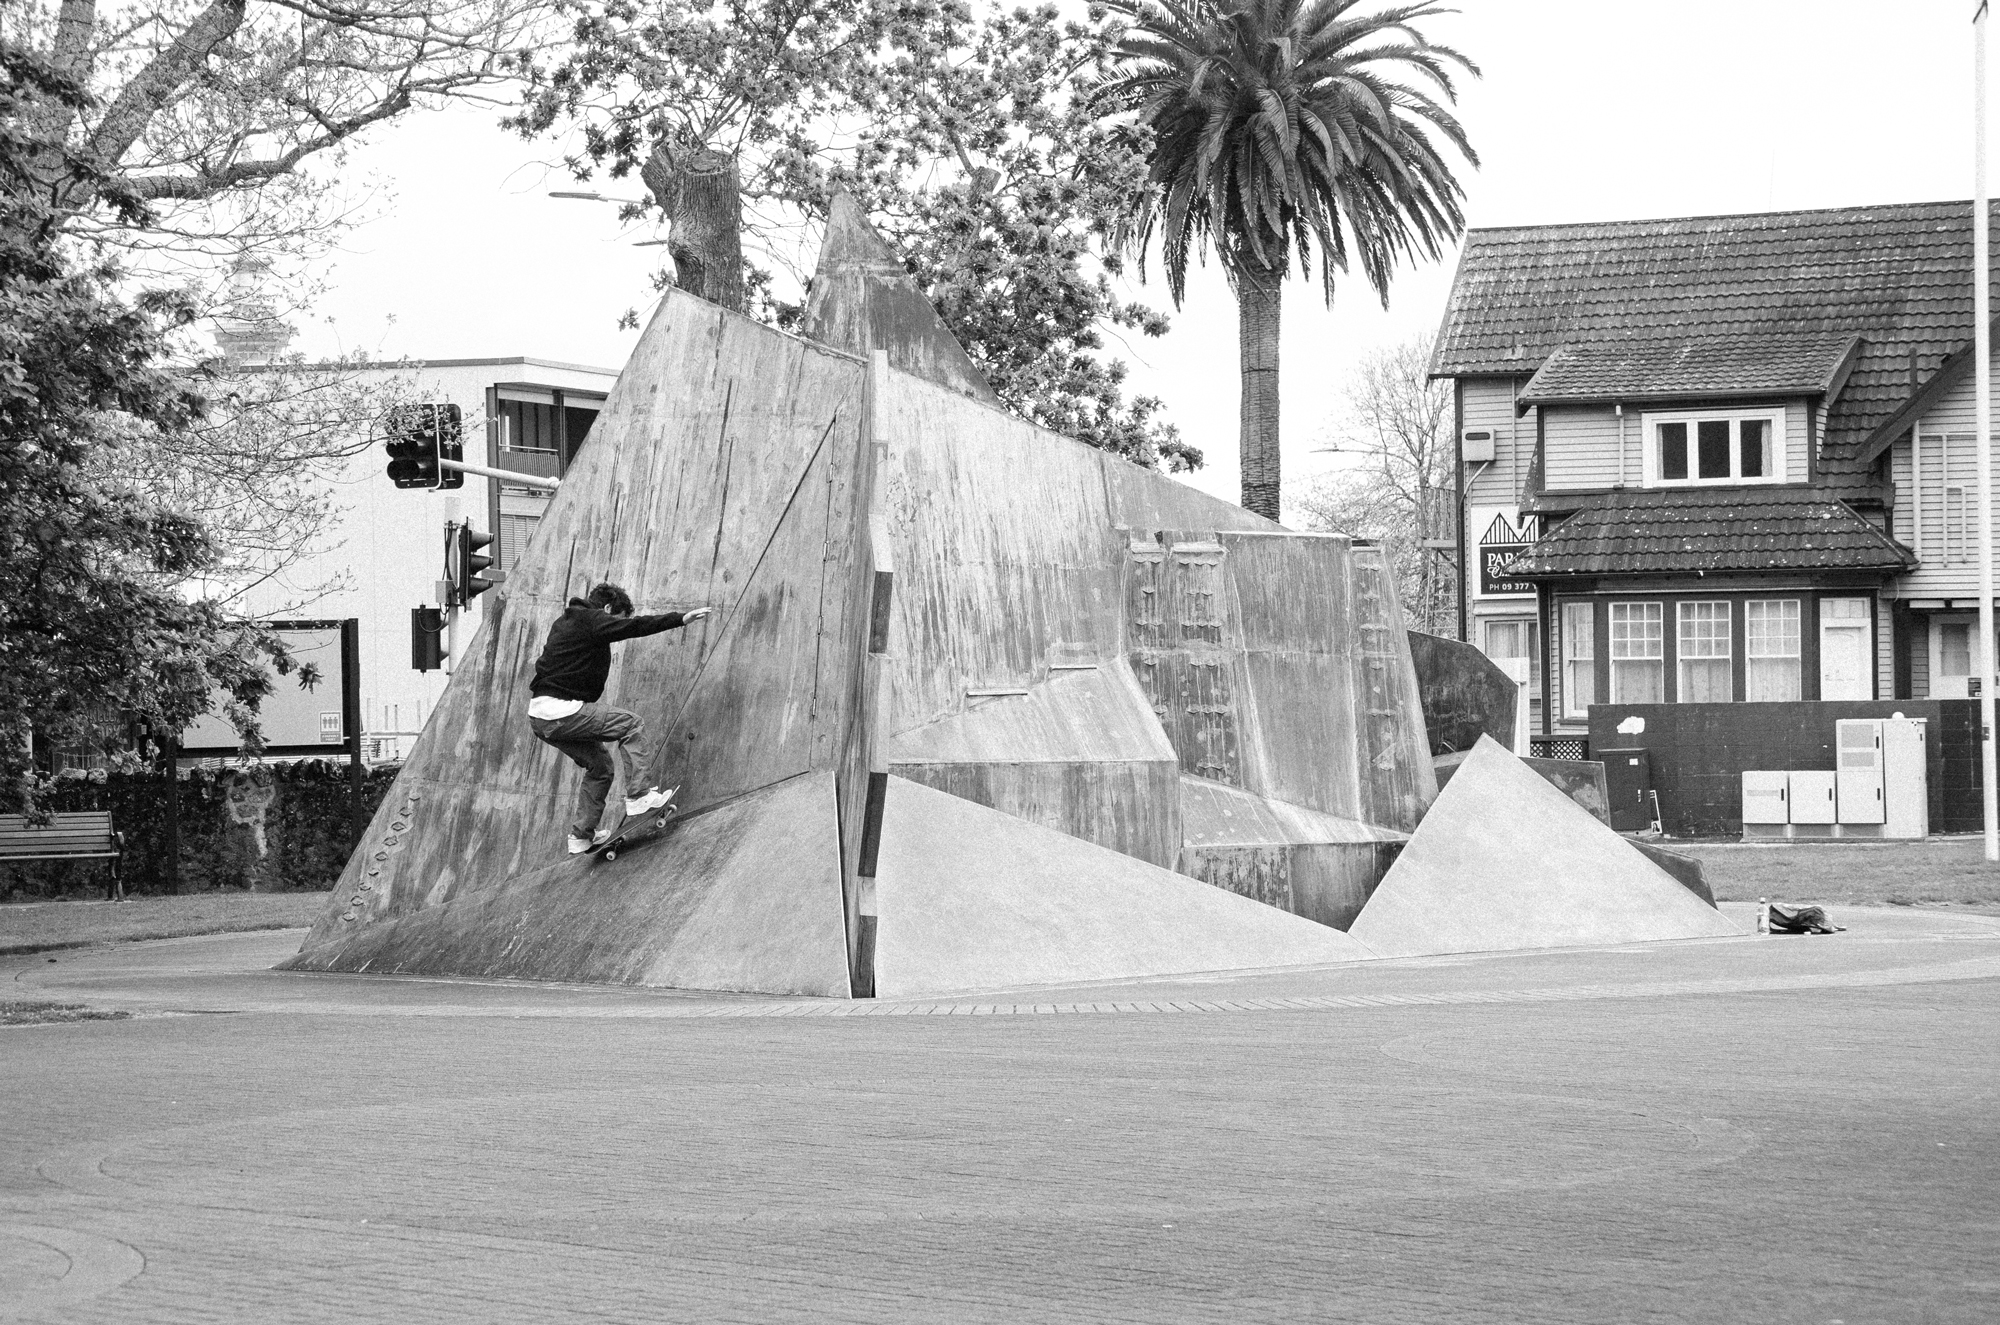 Simon Thorp, alley-oop five-0 grind. Photo by Eisei Toyota